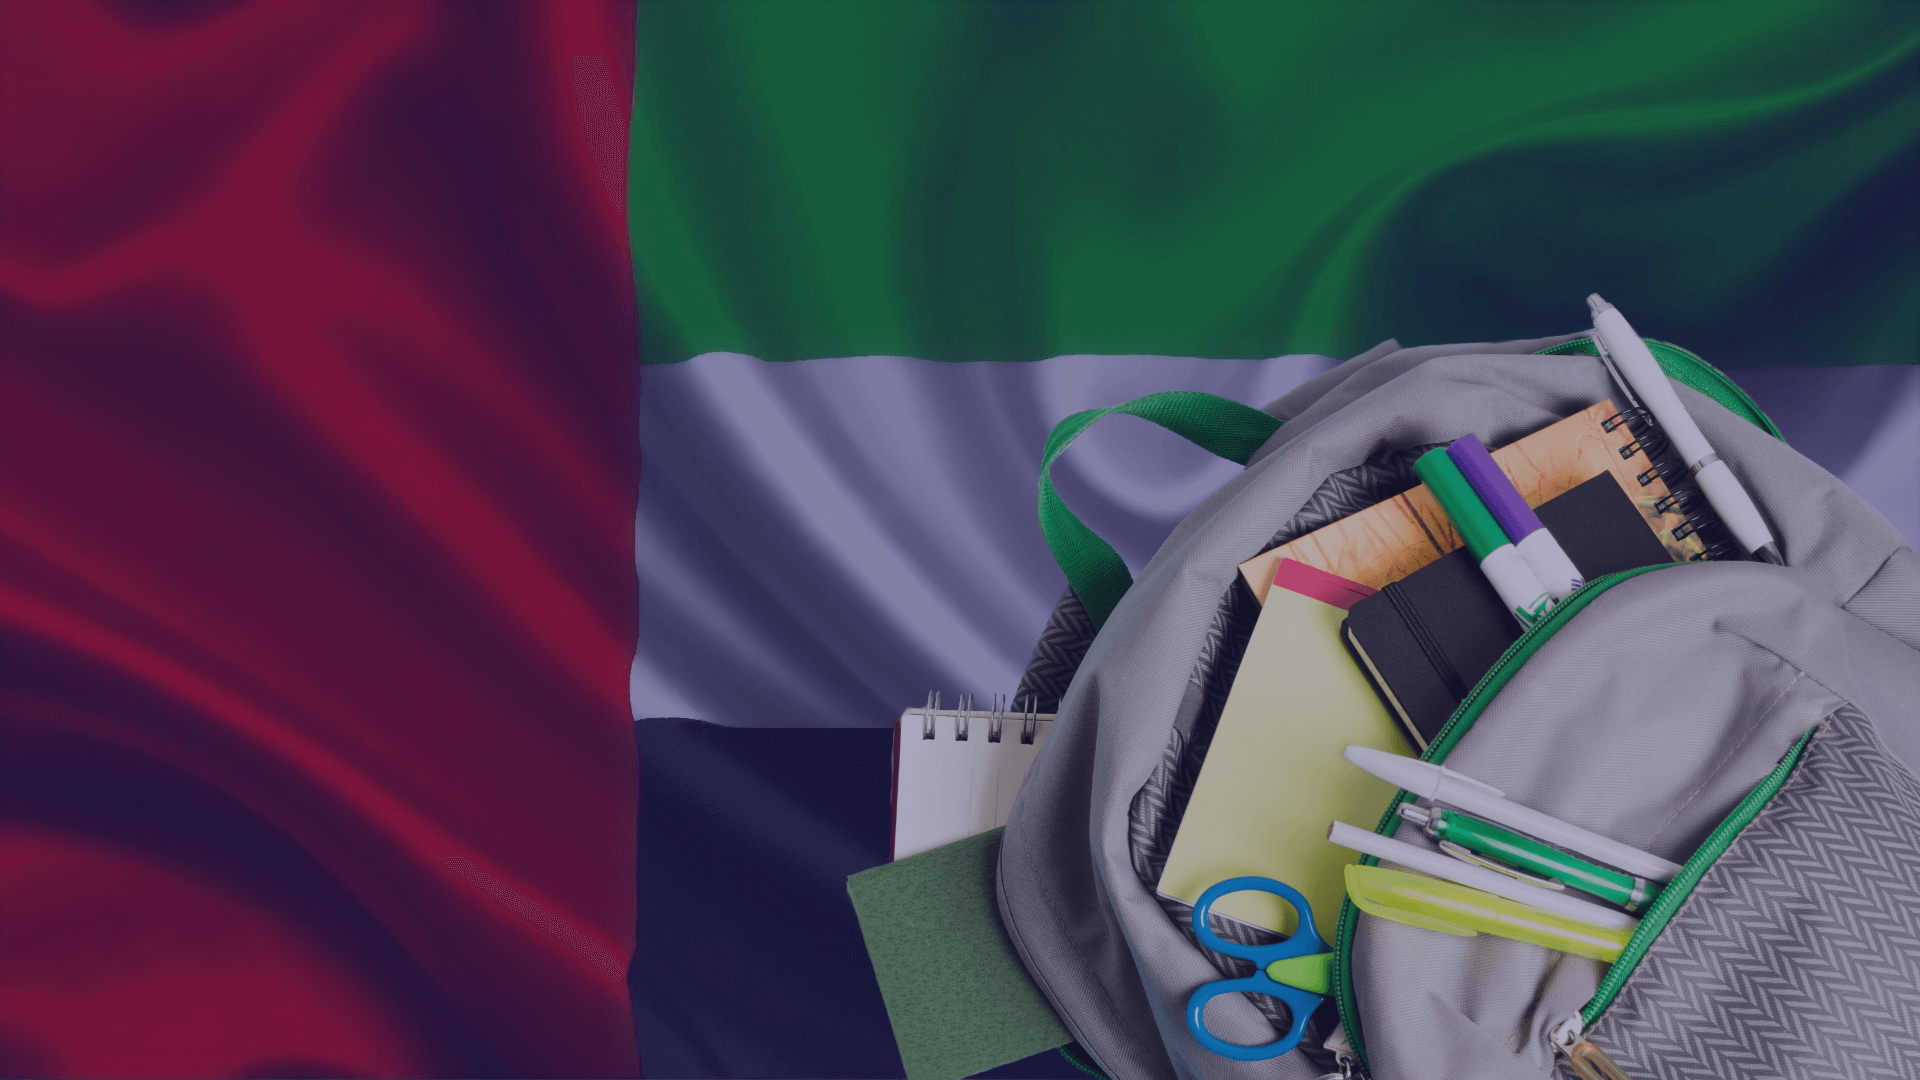 An image of the UAE flag with a school backpack representing education